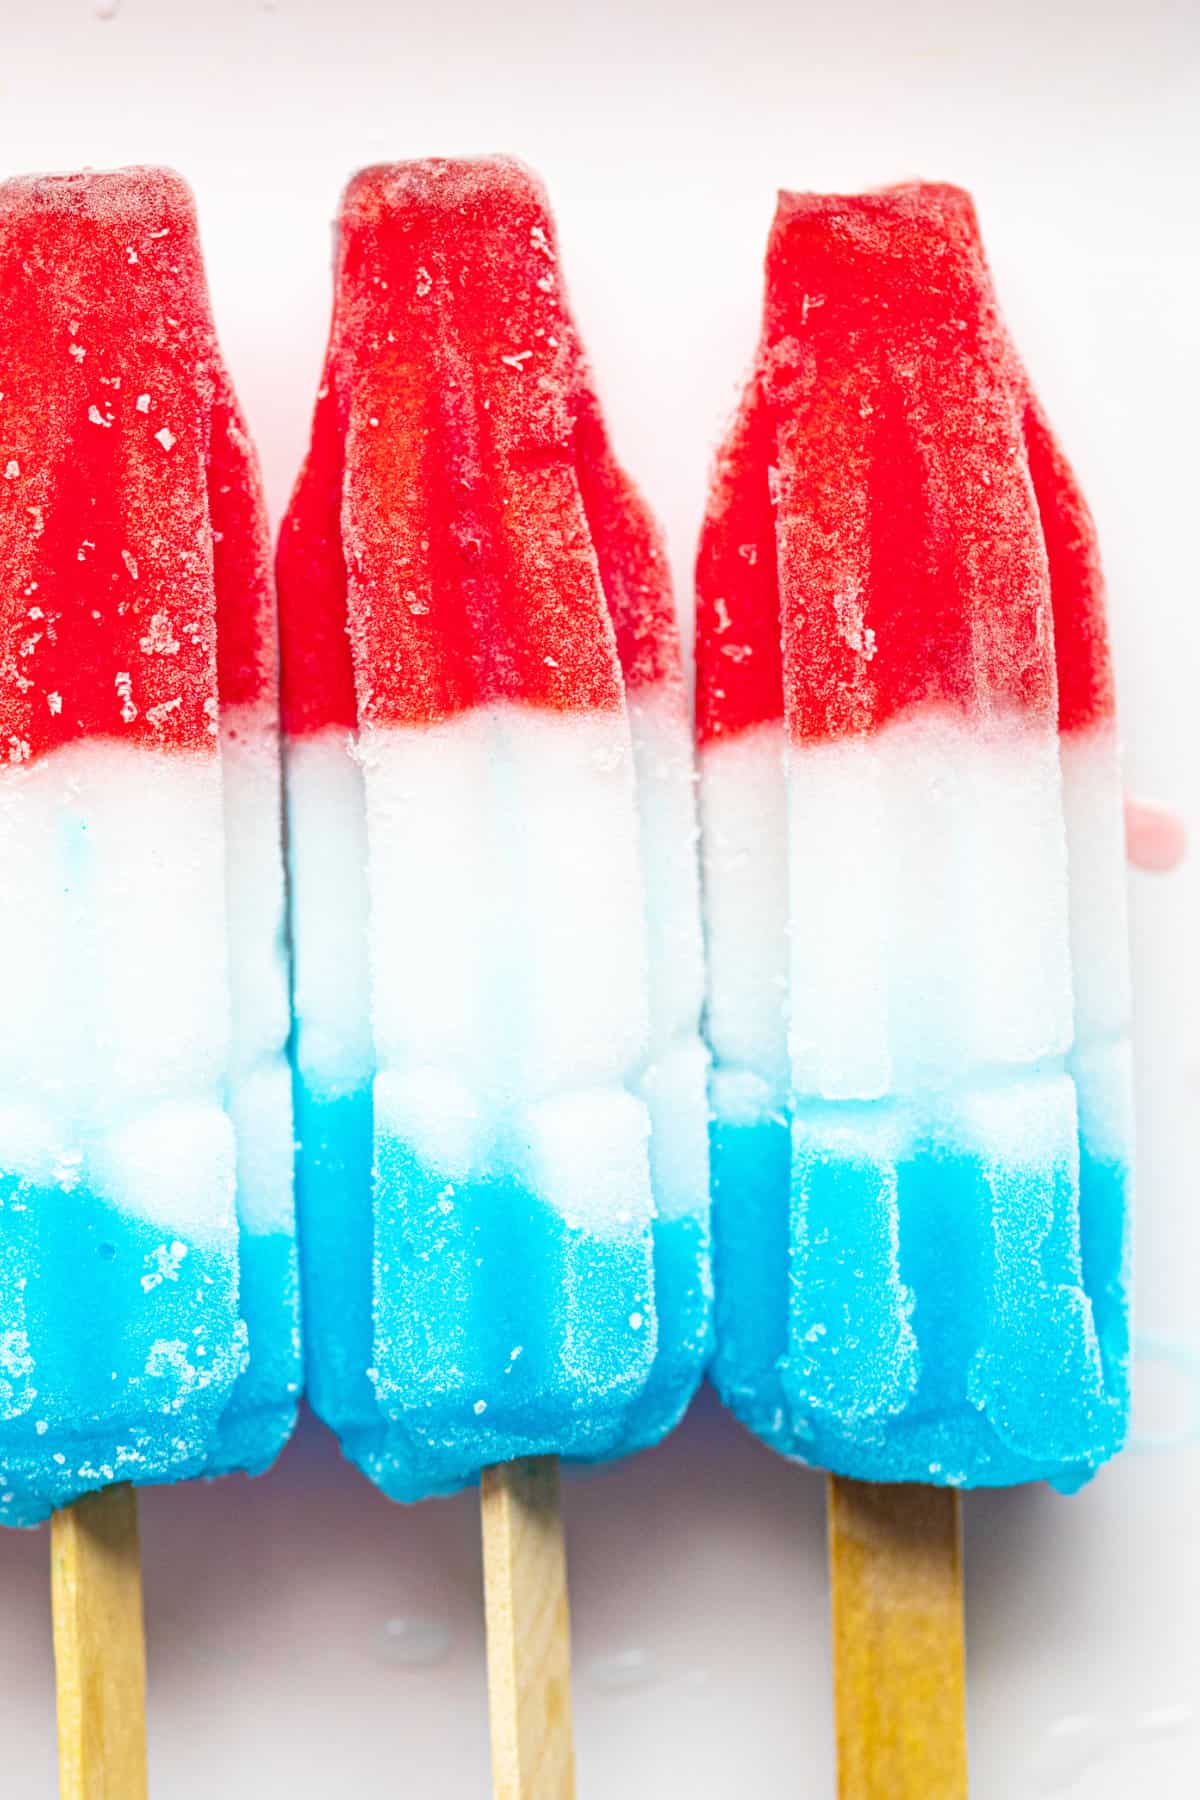 red white and blue popsicles on a tray of ice cubes, popular frozen treats.